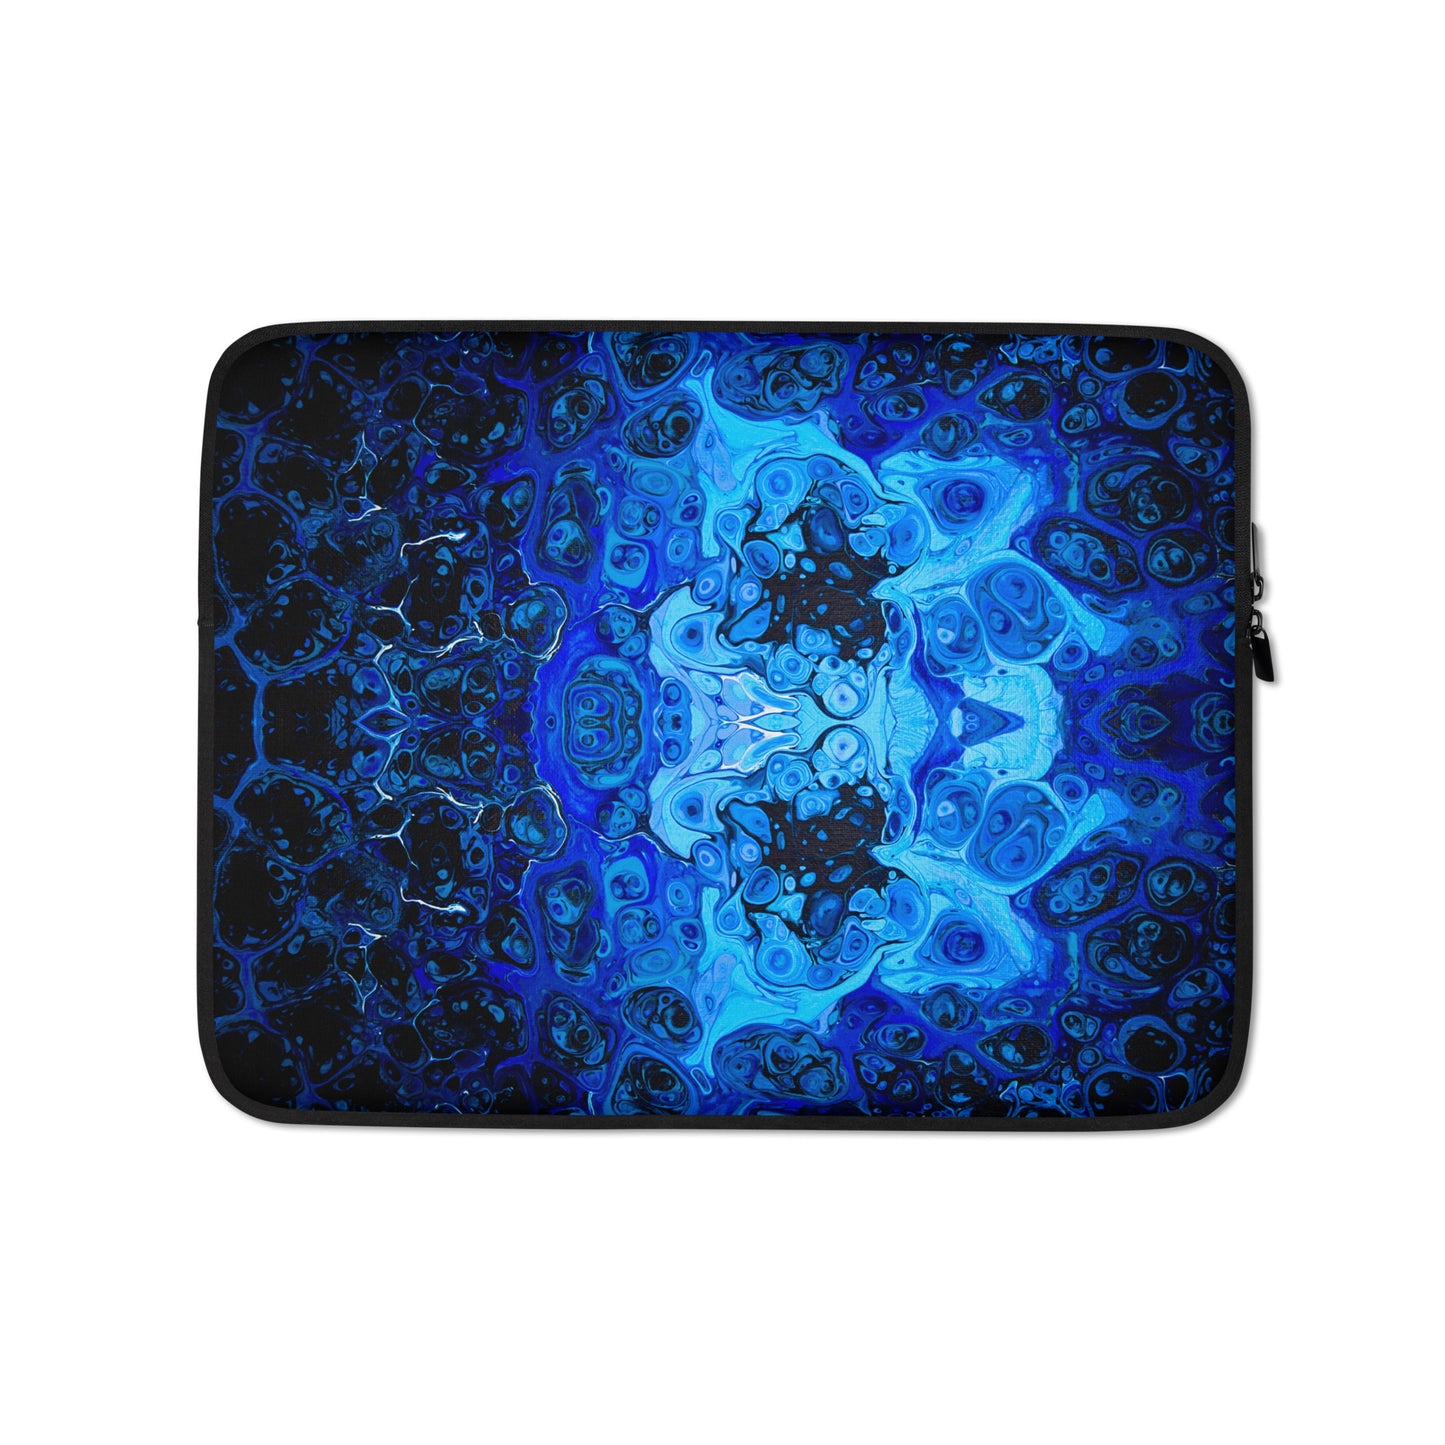 NightOwl Studio Padded Laptop Sleeve with Faux Fur Lining, 13 and 15 Inch Covers for Portable Computers and Large Tablets, Slim and Portable Neoprene for Work, Travel, or Gaming, Blue Bliss